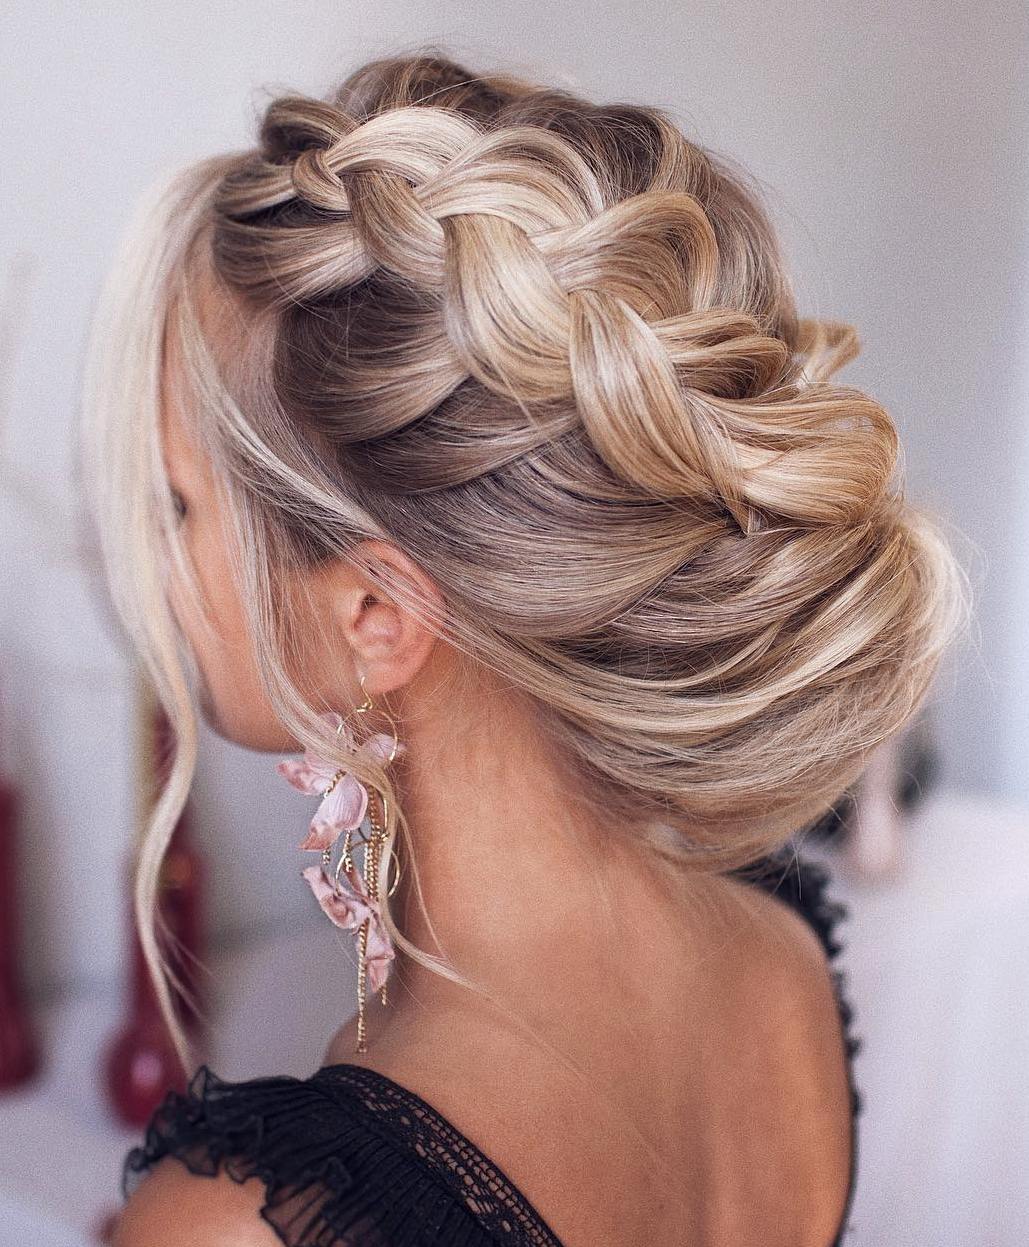 Relaxed Braided Updo For Prom